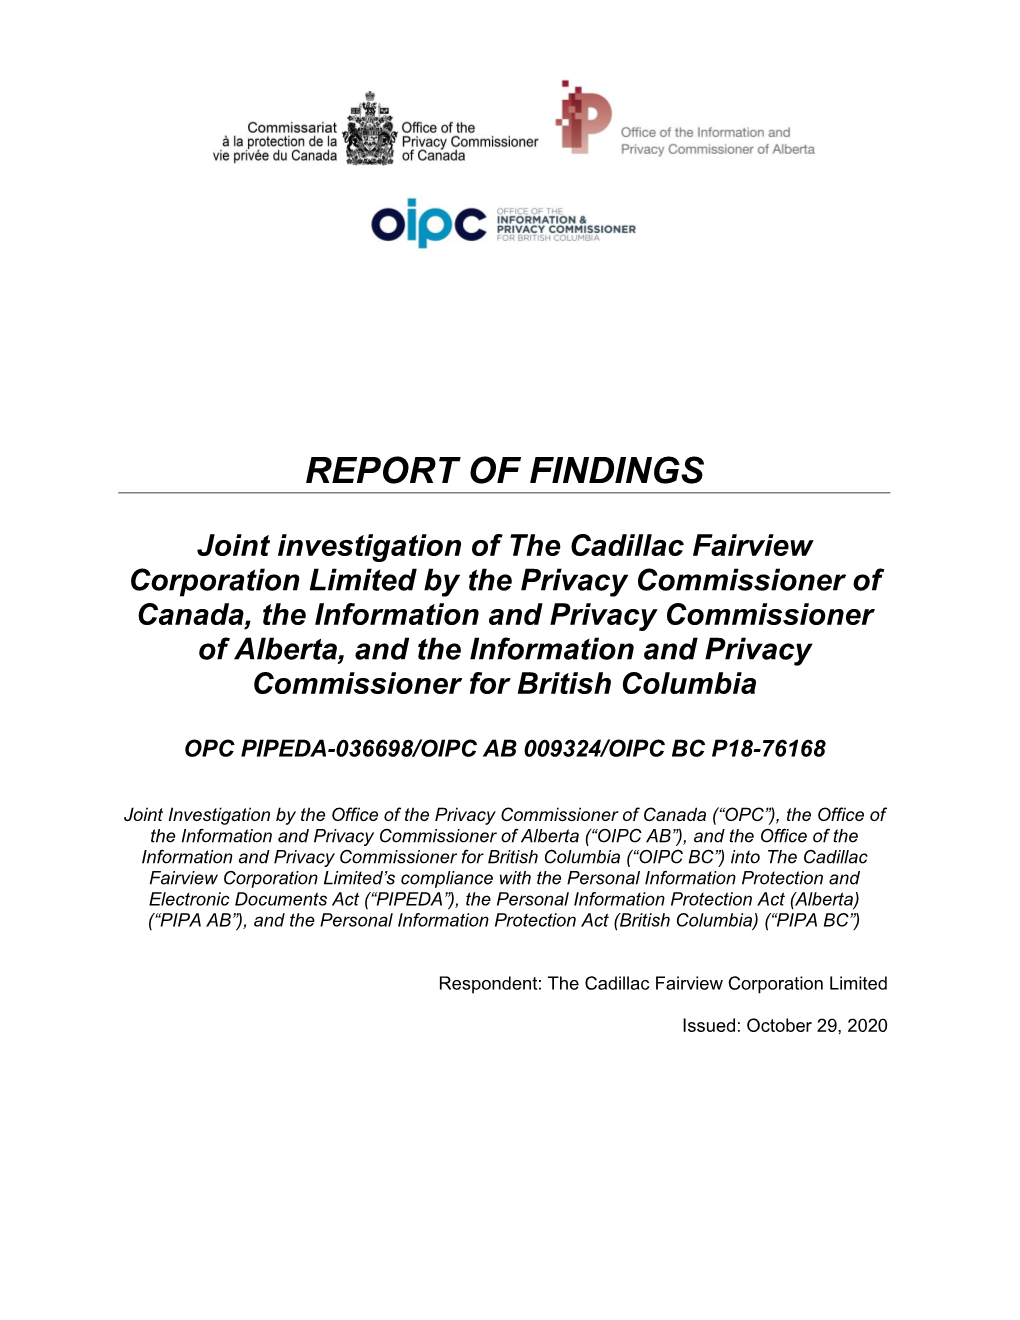 Report of Findings: Joint Investigation of the Cadillac Fairview